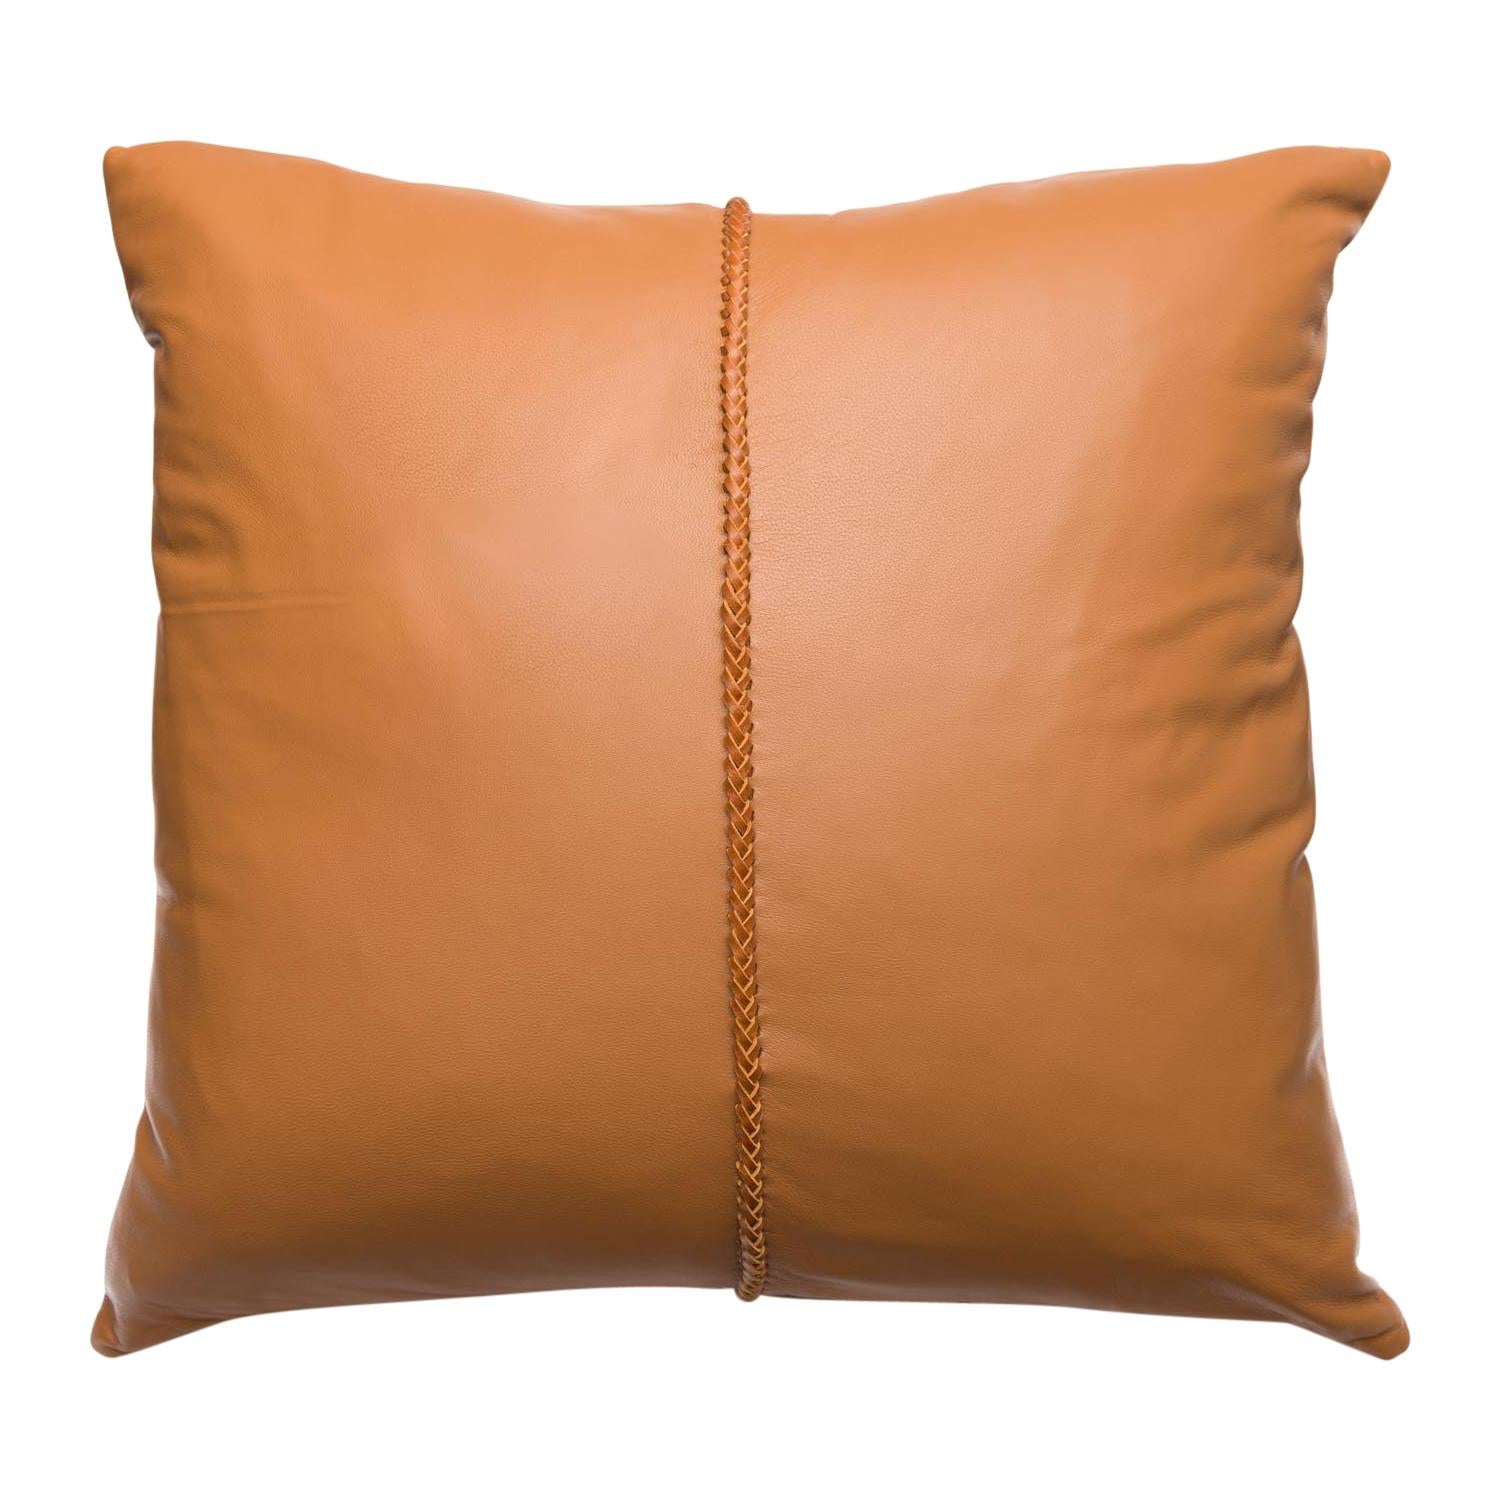 Tan Leather Pillow with Cross Stitch For Sale